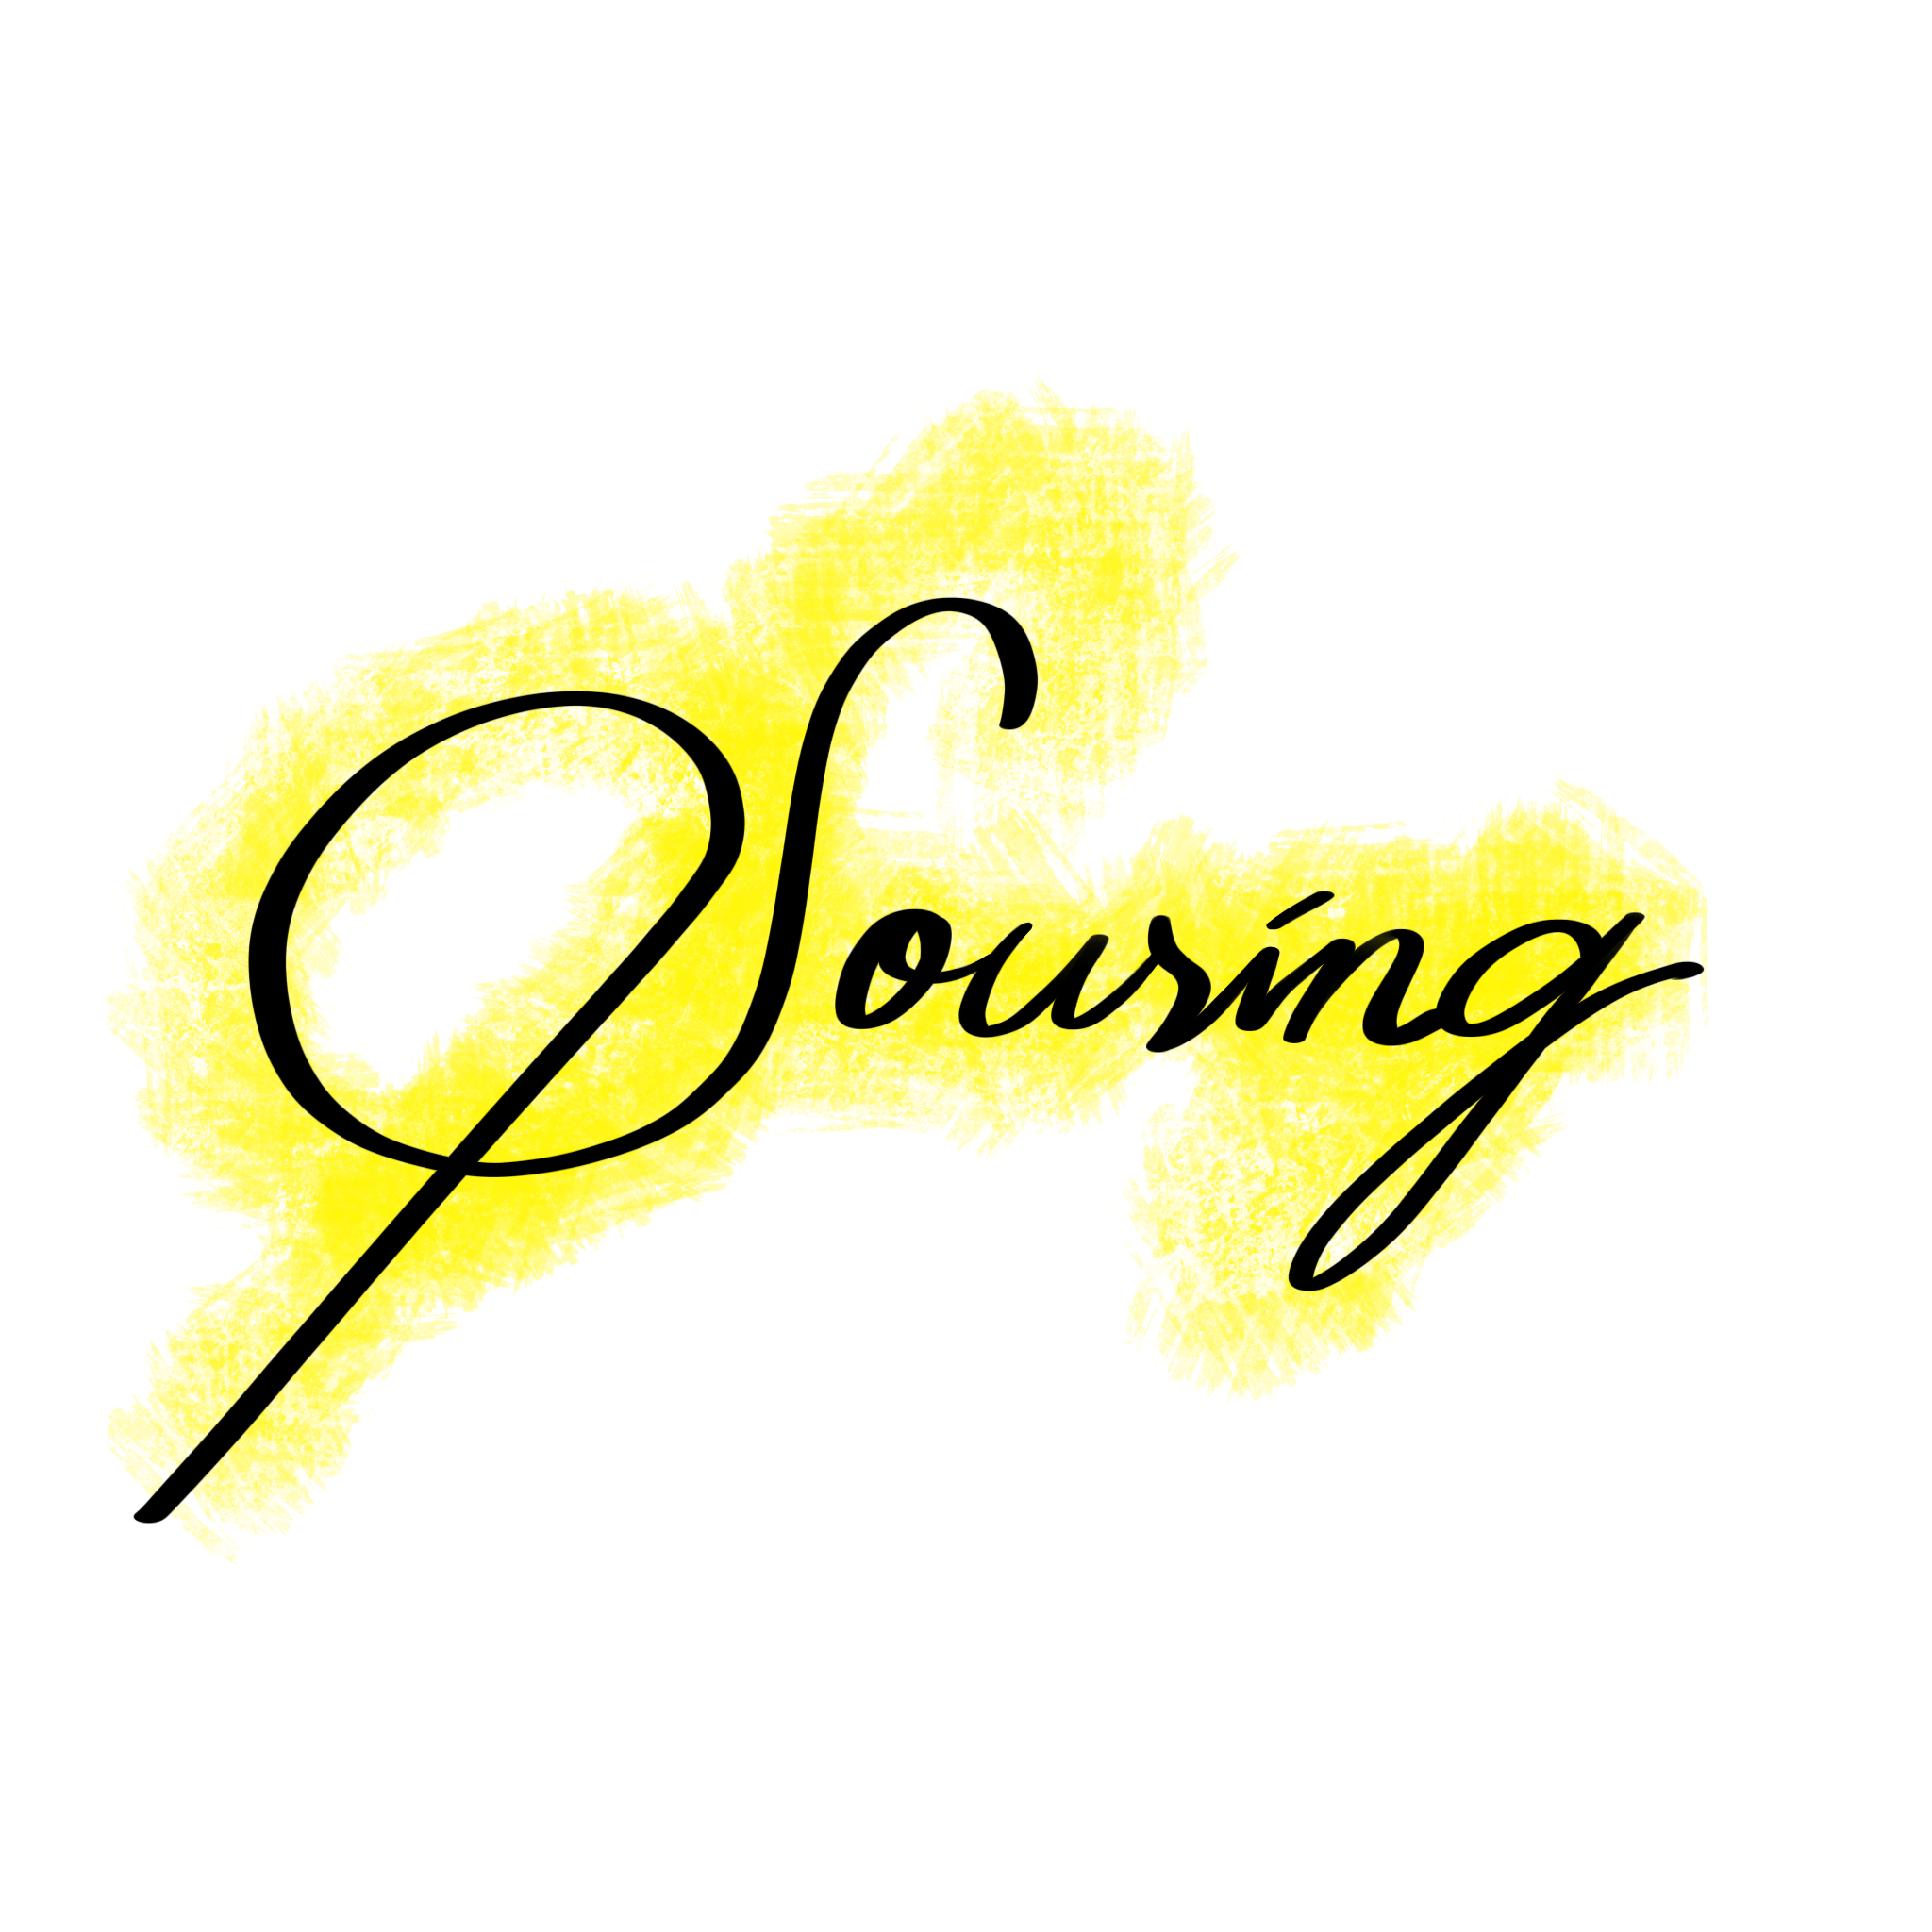 Souring